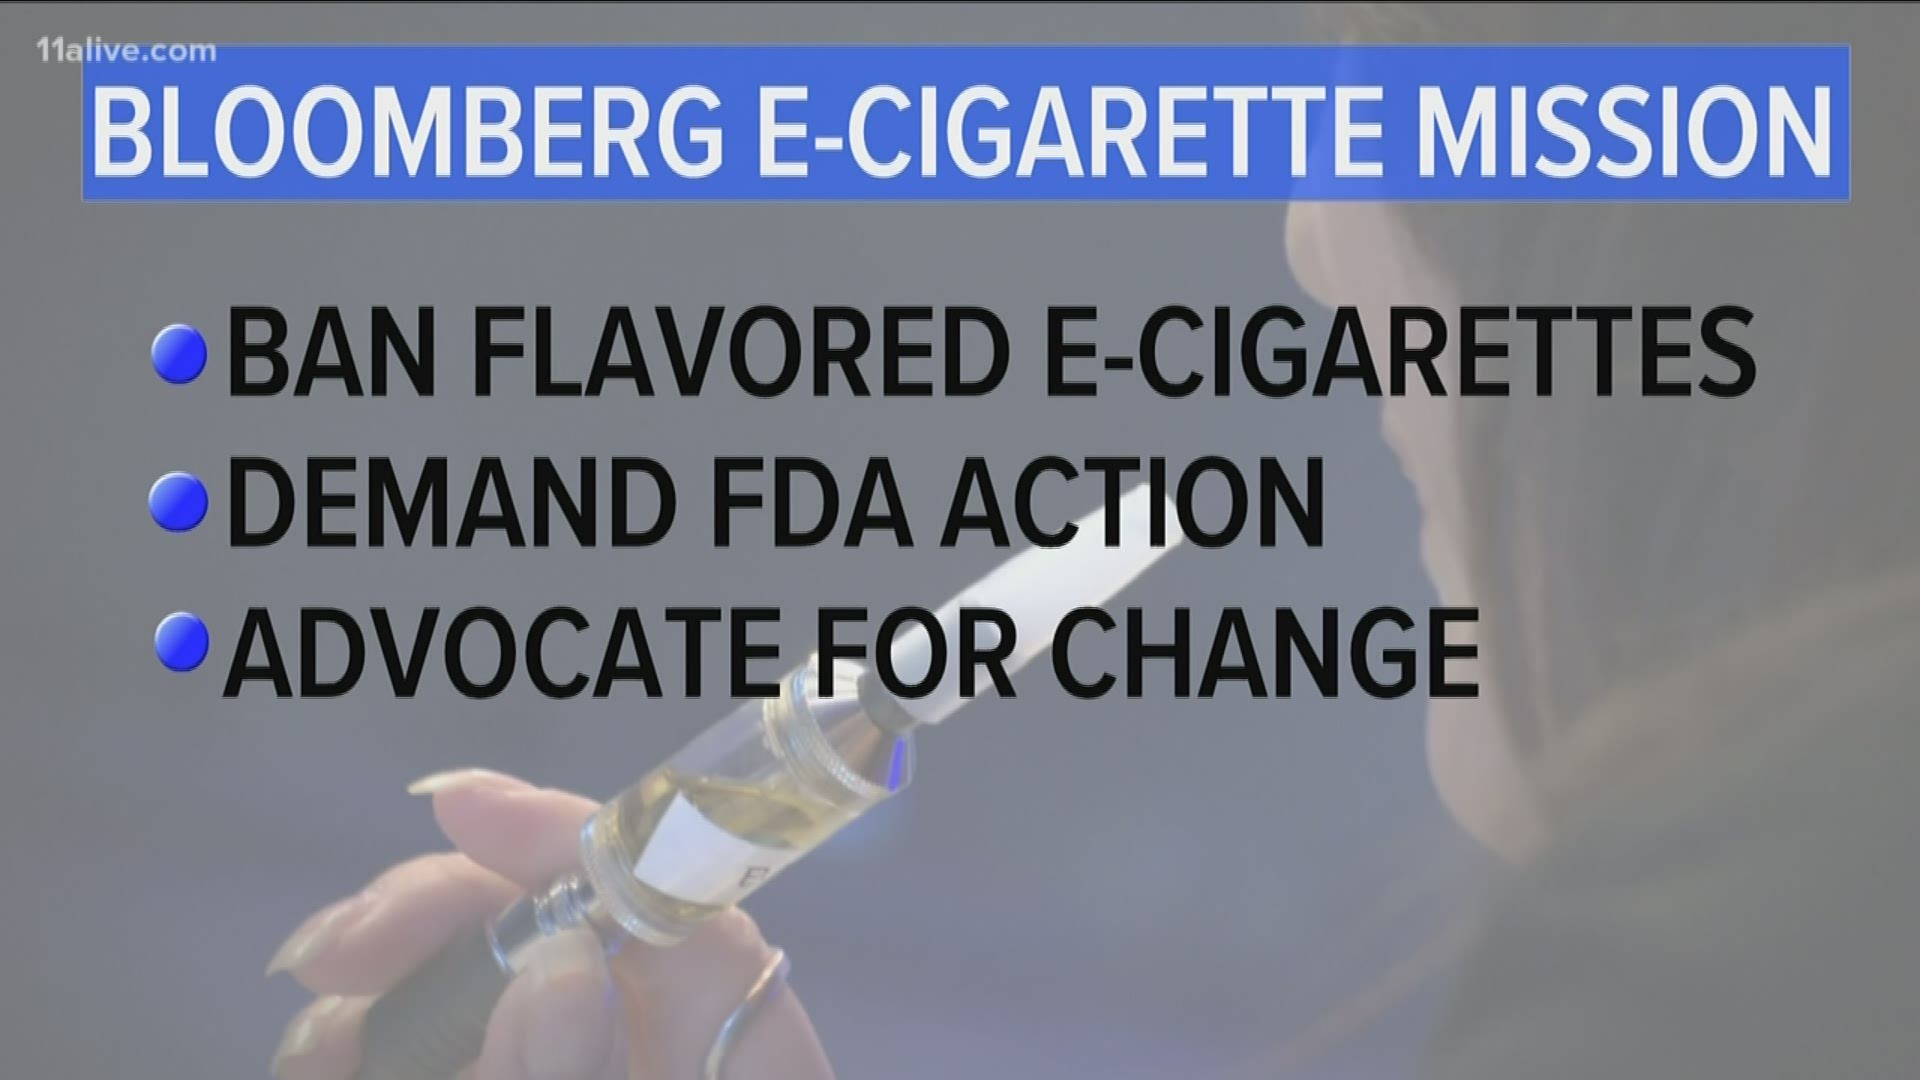 Bloomberg Philanthropies is partnering with the Campaign for Tobacco-Free Kids.